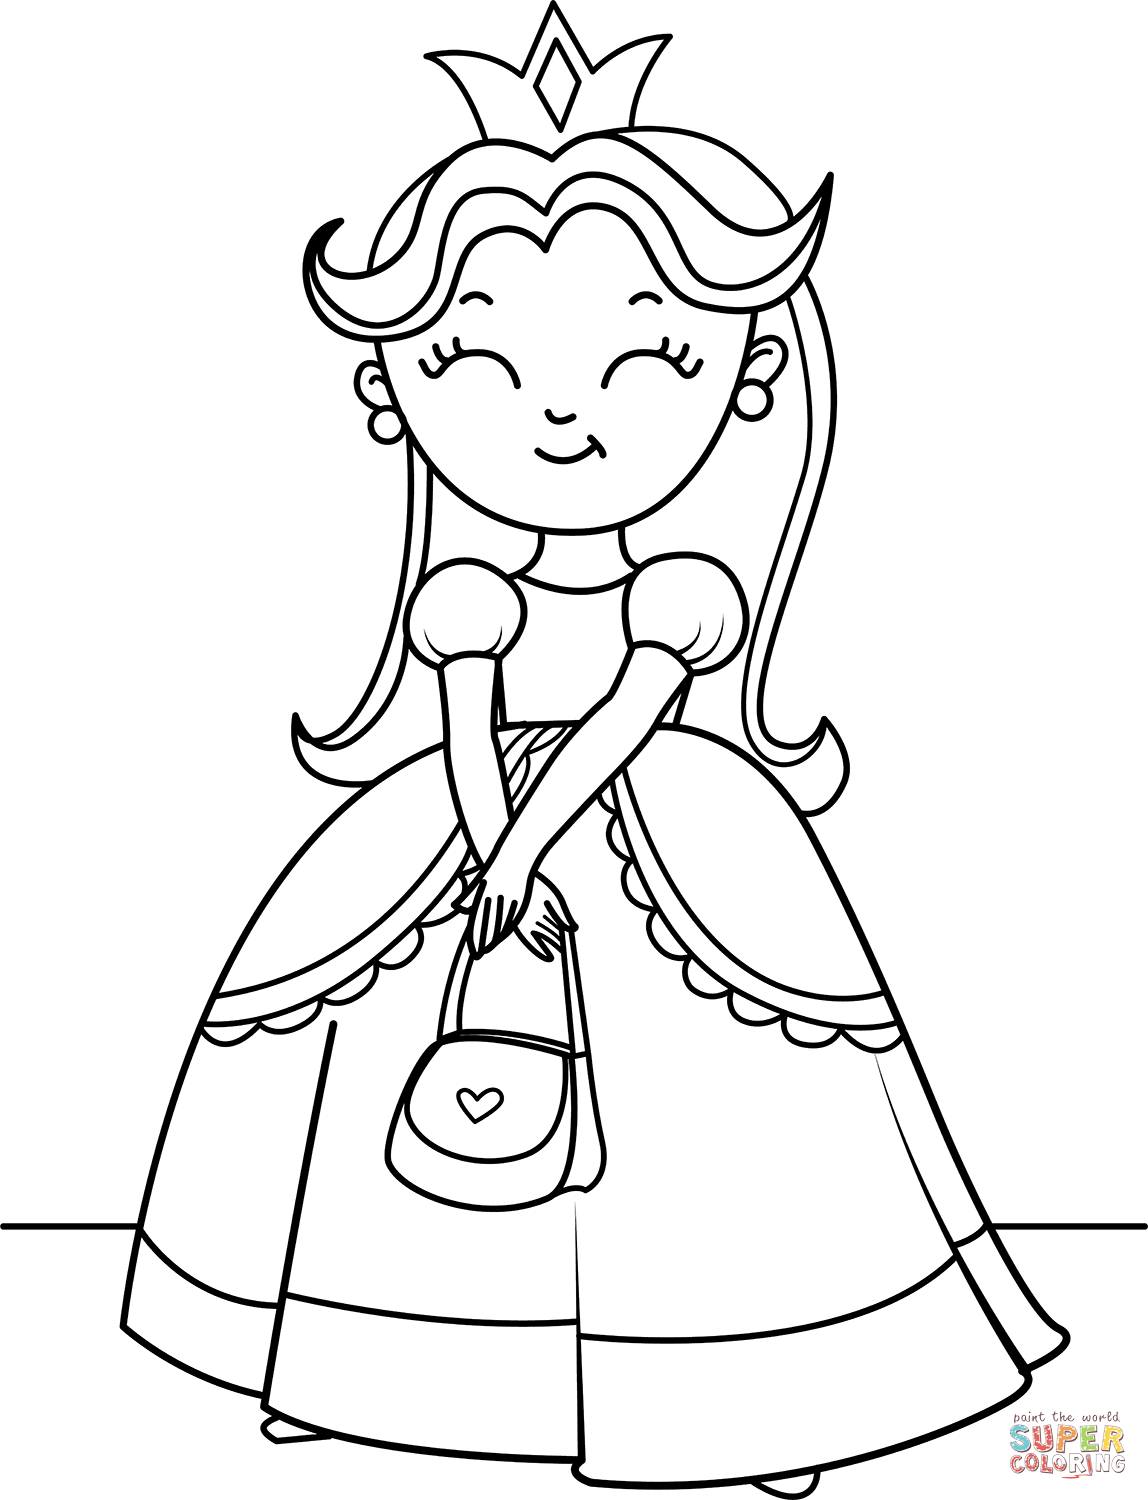 Cute Princess Coloring Pages - Coloring Nation